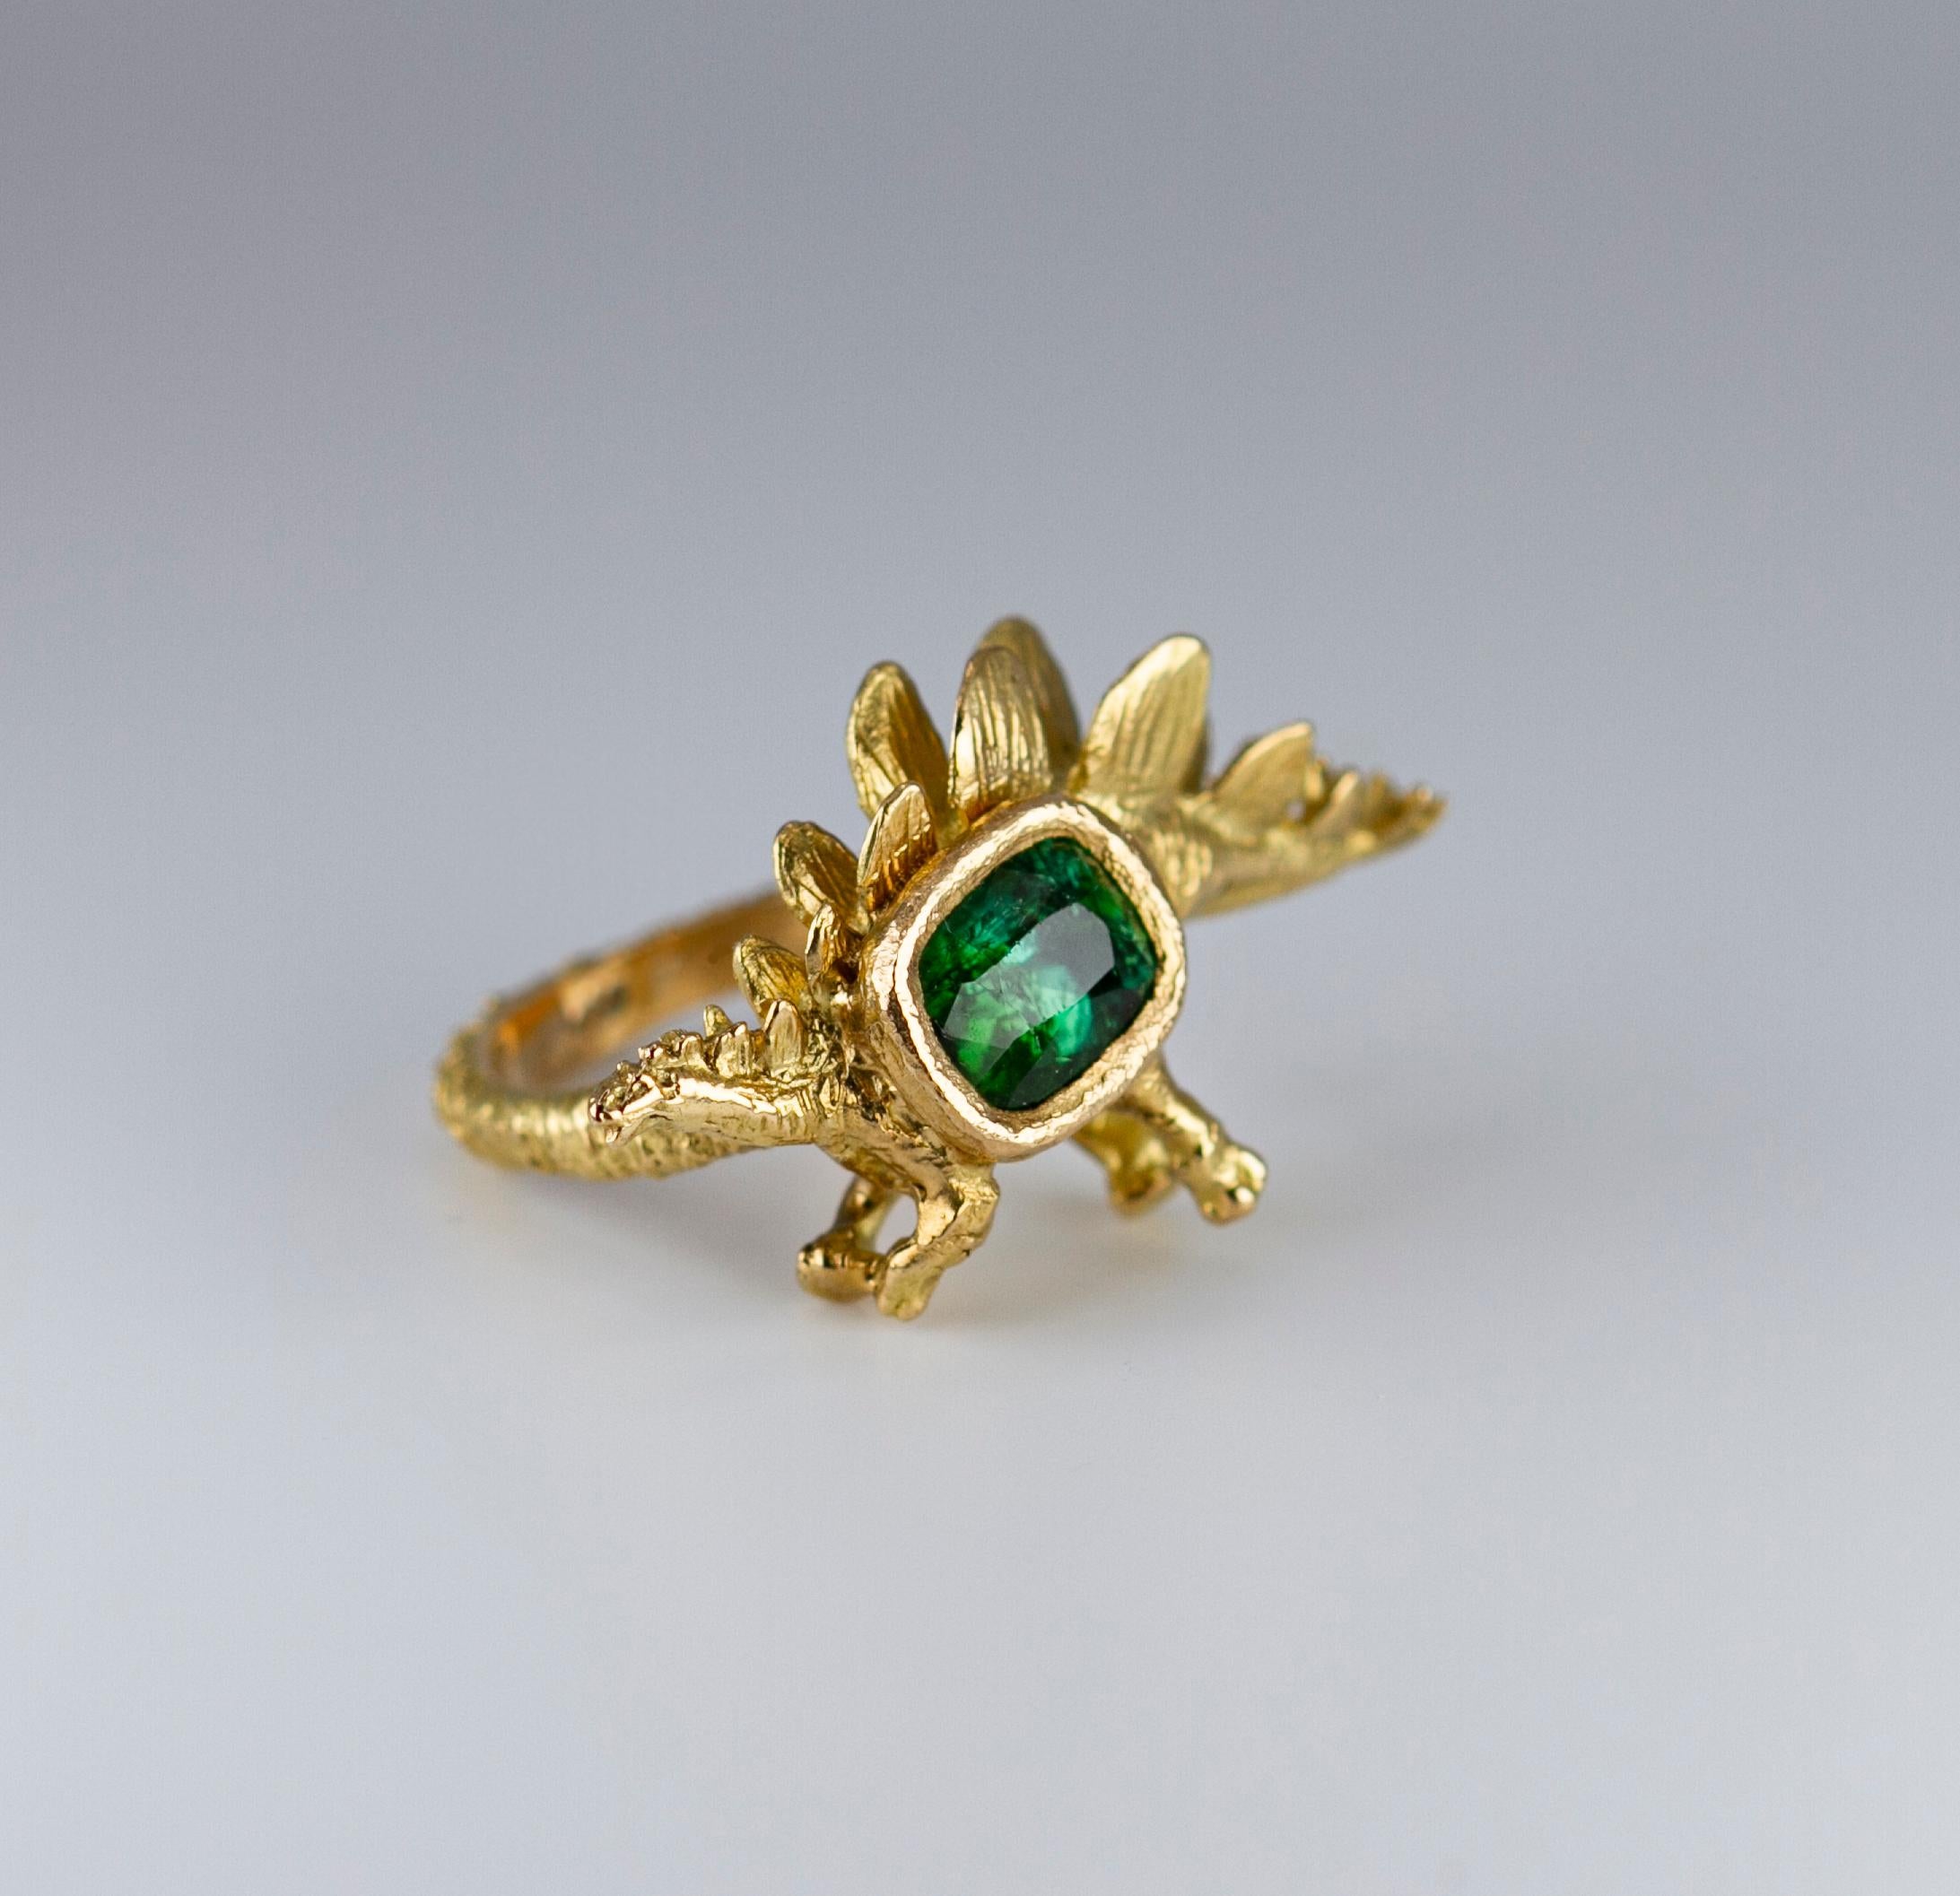 This ring is a one of a kind contemporary jewellery hand sculpted by the French jeweller Binliang Alexander Peng.

The jewellery artist often uses memories of her childhood to create unique pieces.
